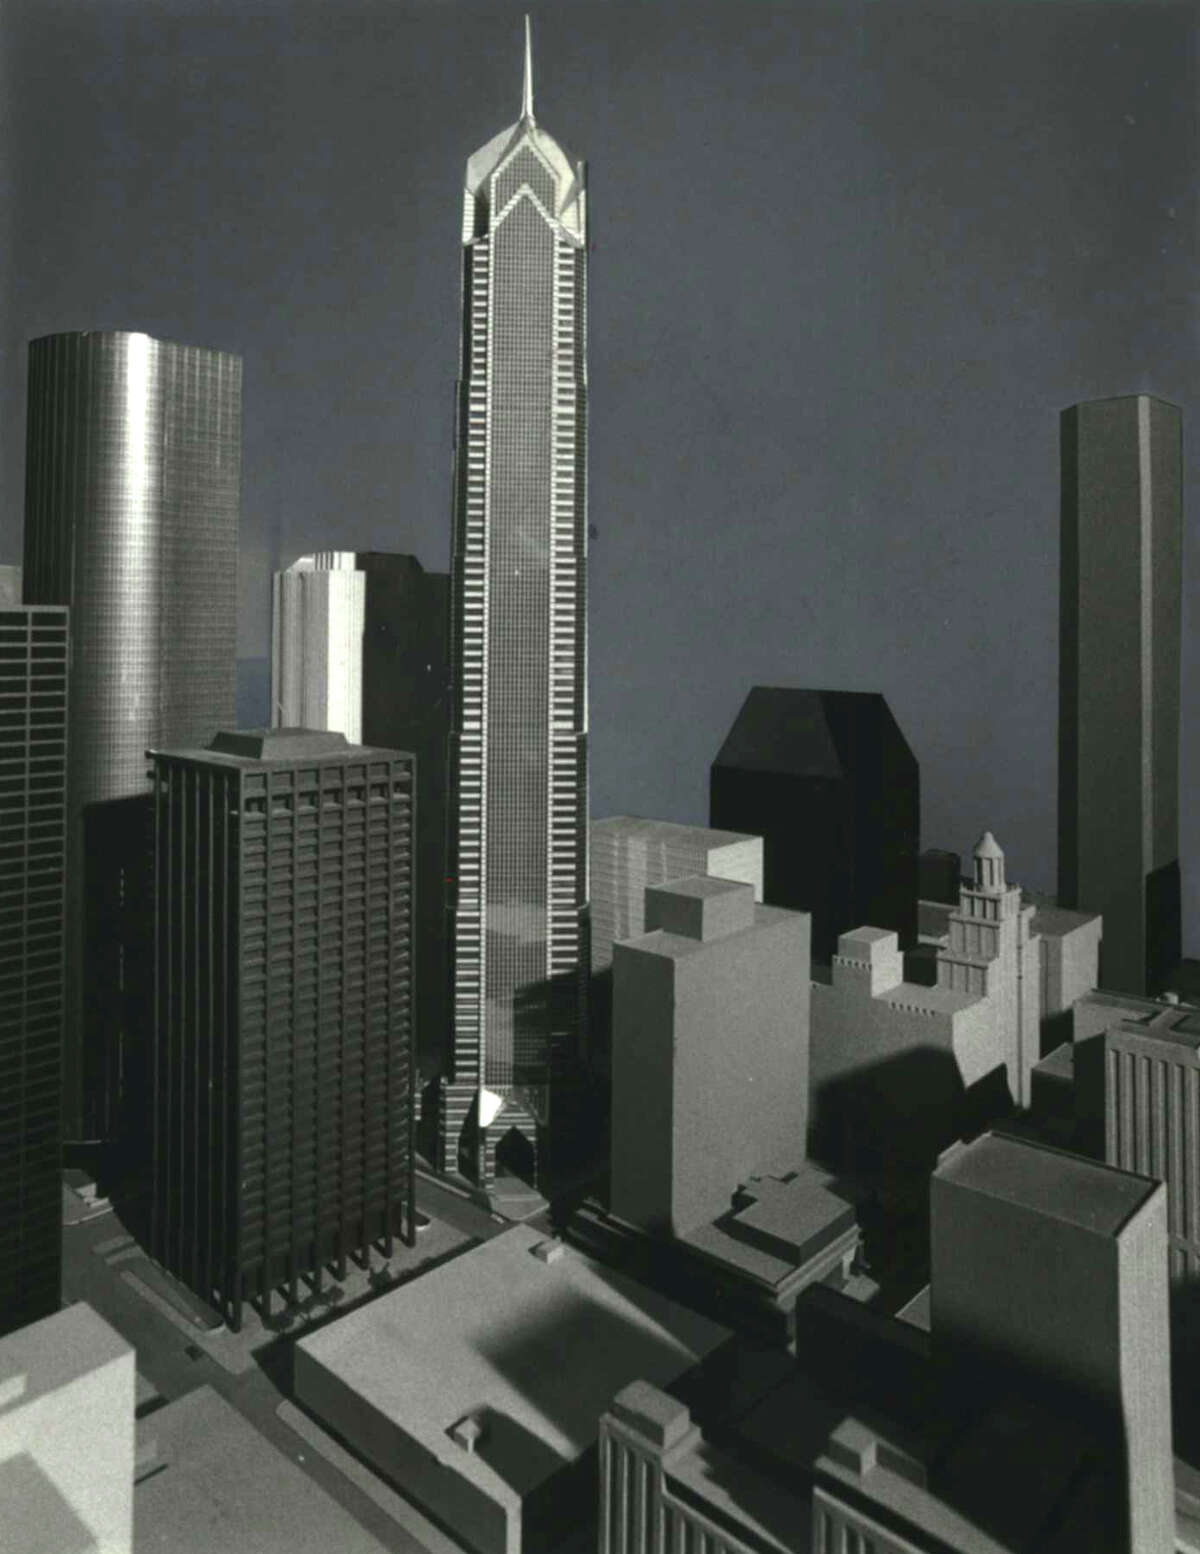 With its spire and high-flying gables, Helmut Jahn's prize-winning design for the proposed new Southwest Tower to rise an equivalent of 100 stories in downtown Houston is like a cathedral in the sky, and has rich references to the jazzy architecture of the 1920s and 1930s.